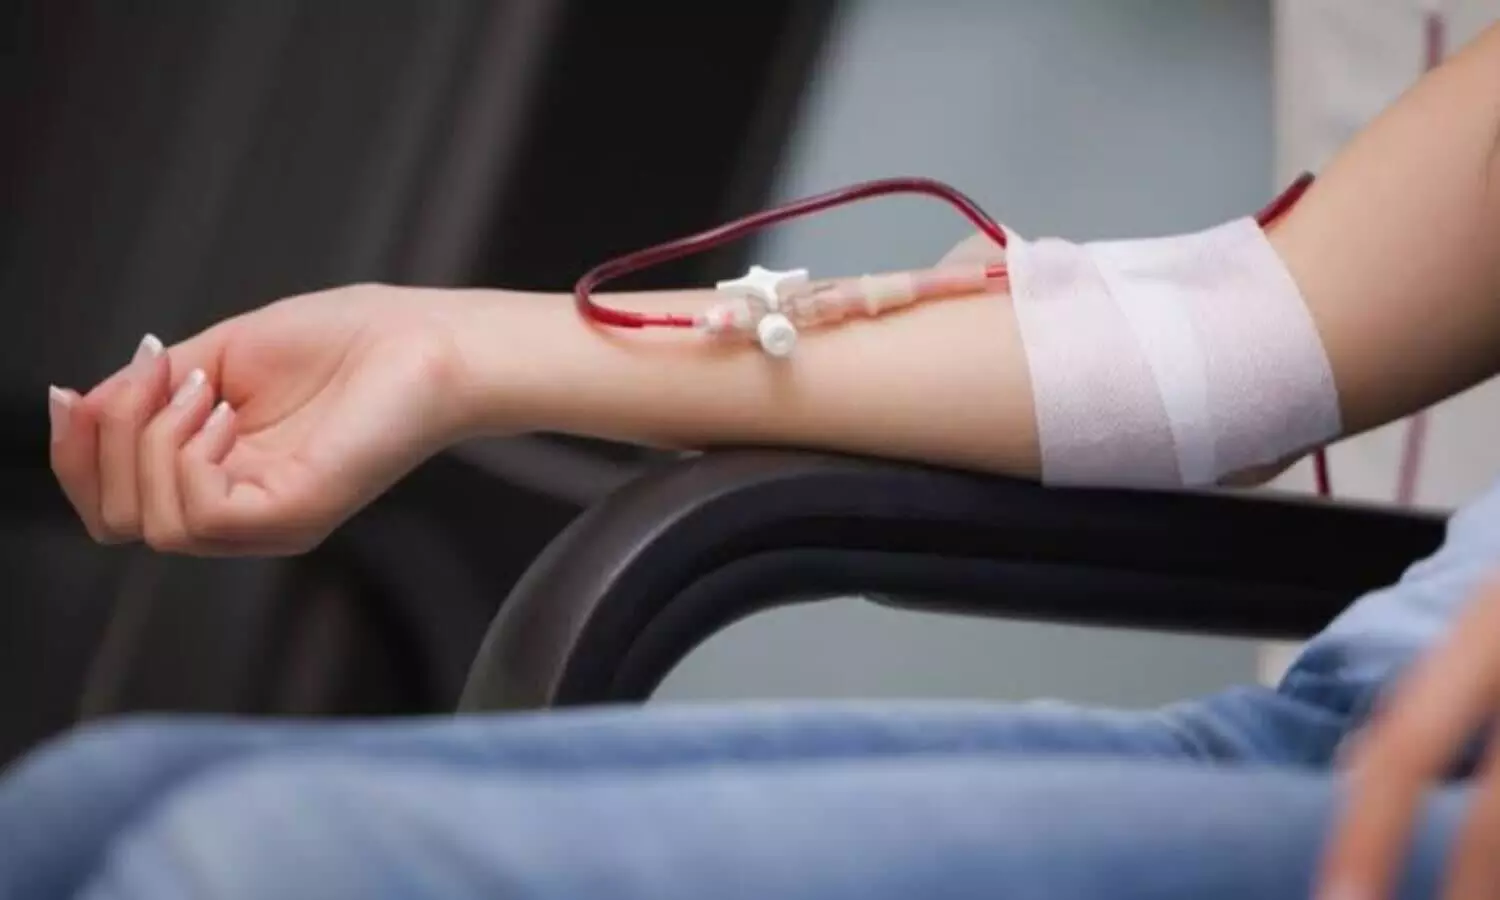 Tips for Blood Donation